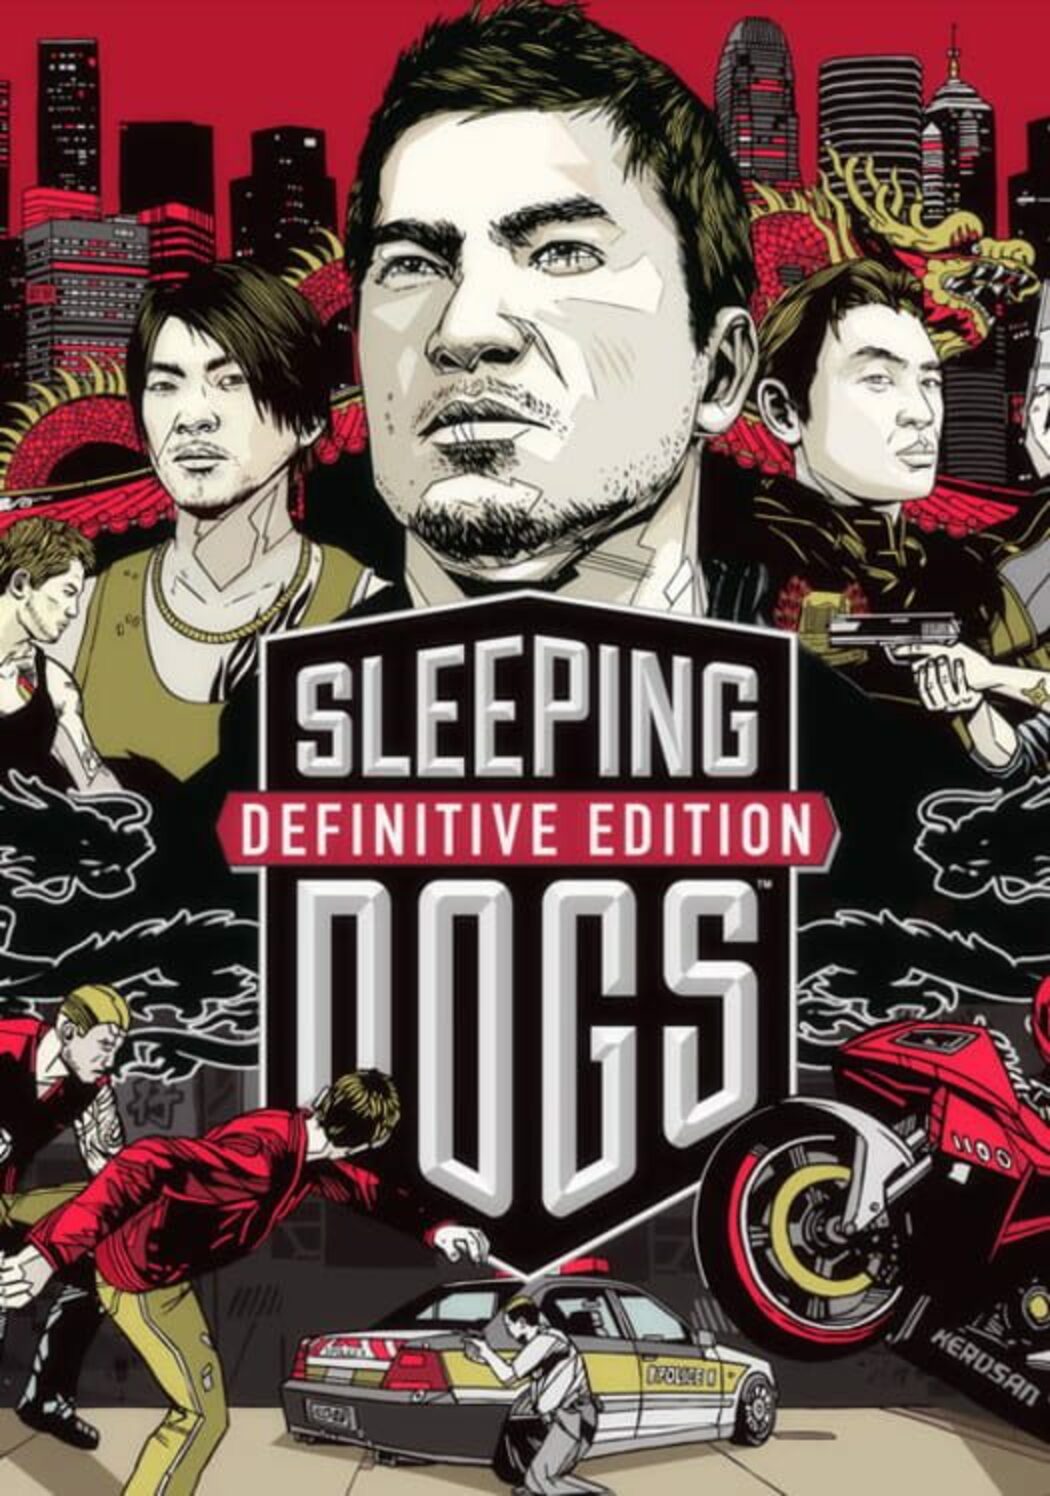 Sleeping Dogs Definitive Edition - PC - Buy it at Nuuvem